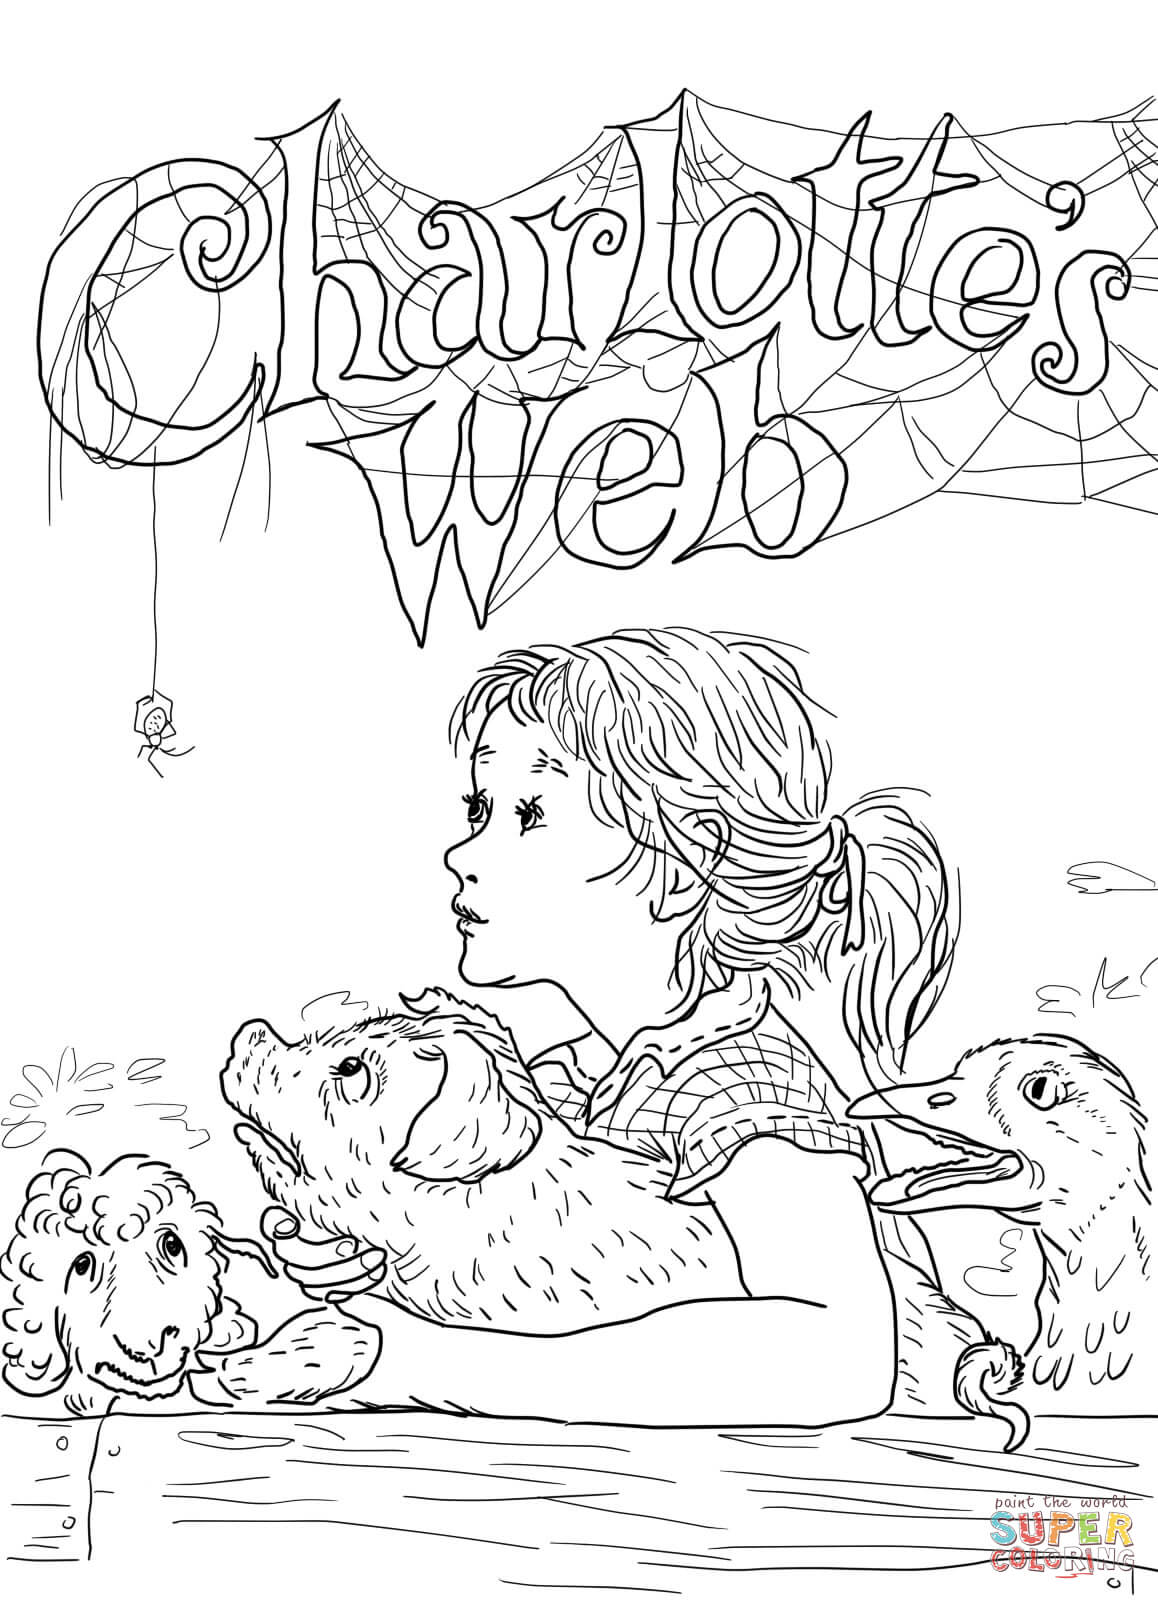 Free free charlotte s web coloring pages download free free charlotte s web coloring pages png images free cliparts on clipart library